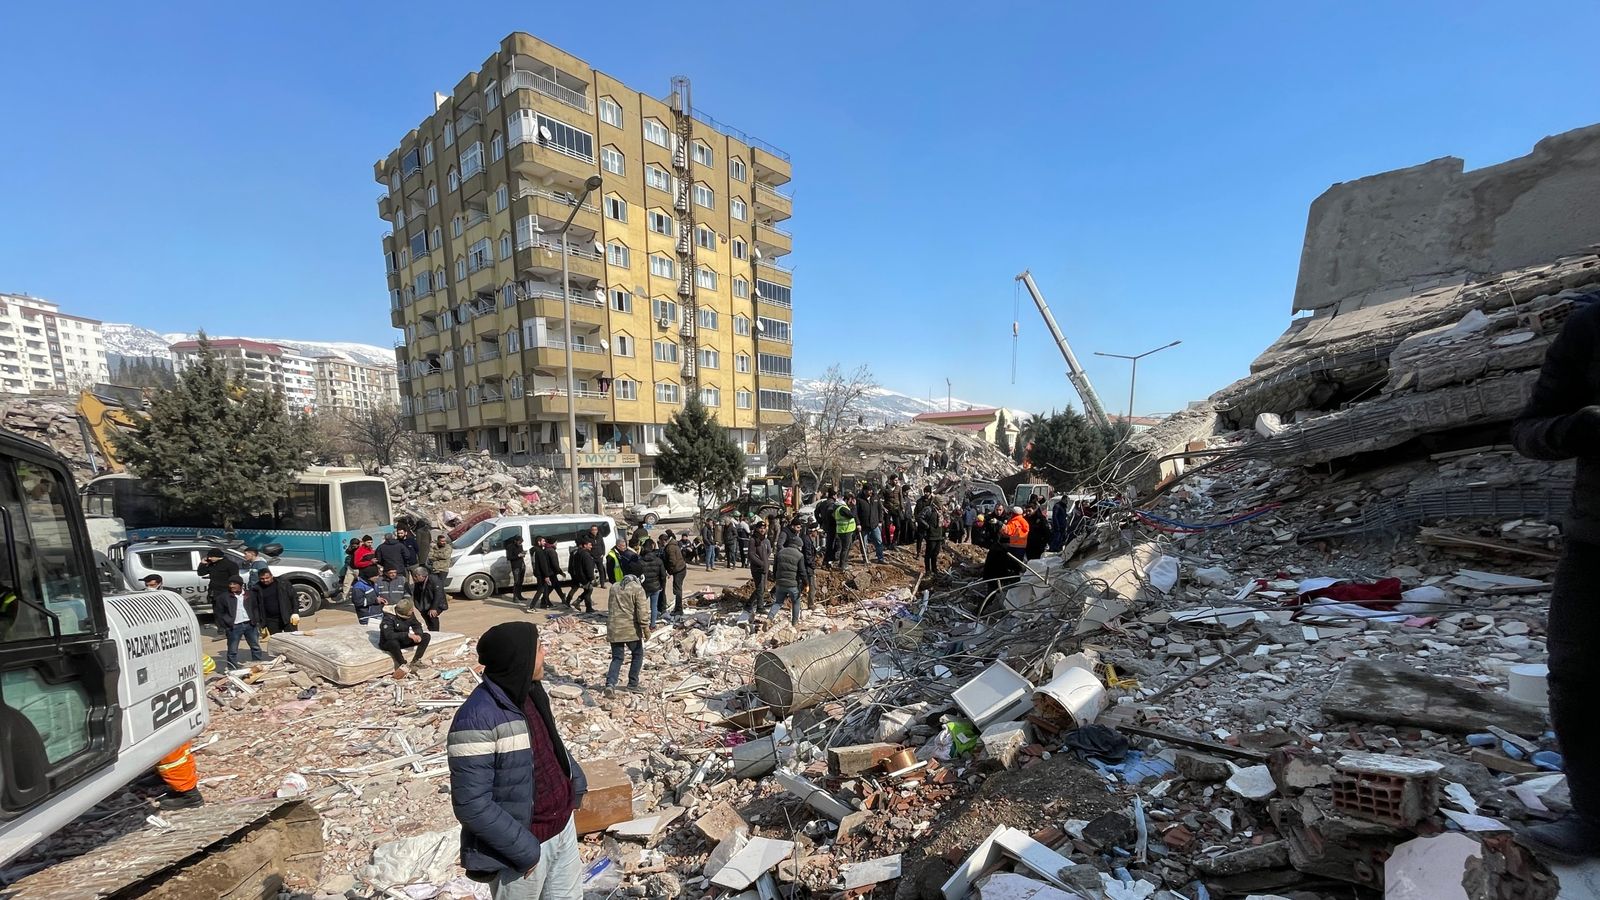 Turkey-Syria earthquake: 'We thought they were dead' - sisters rescued minutes apart from rubble